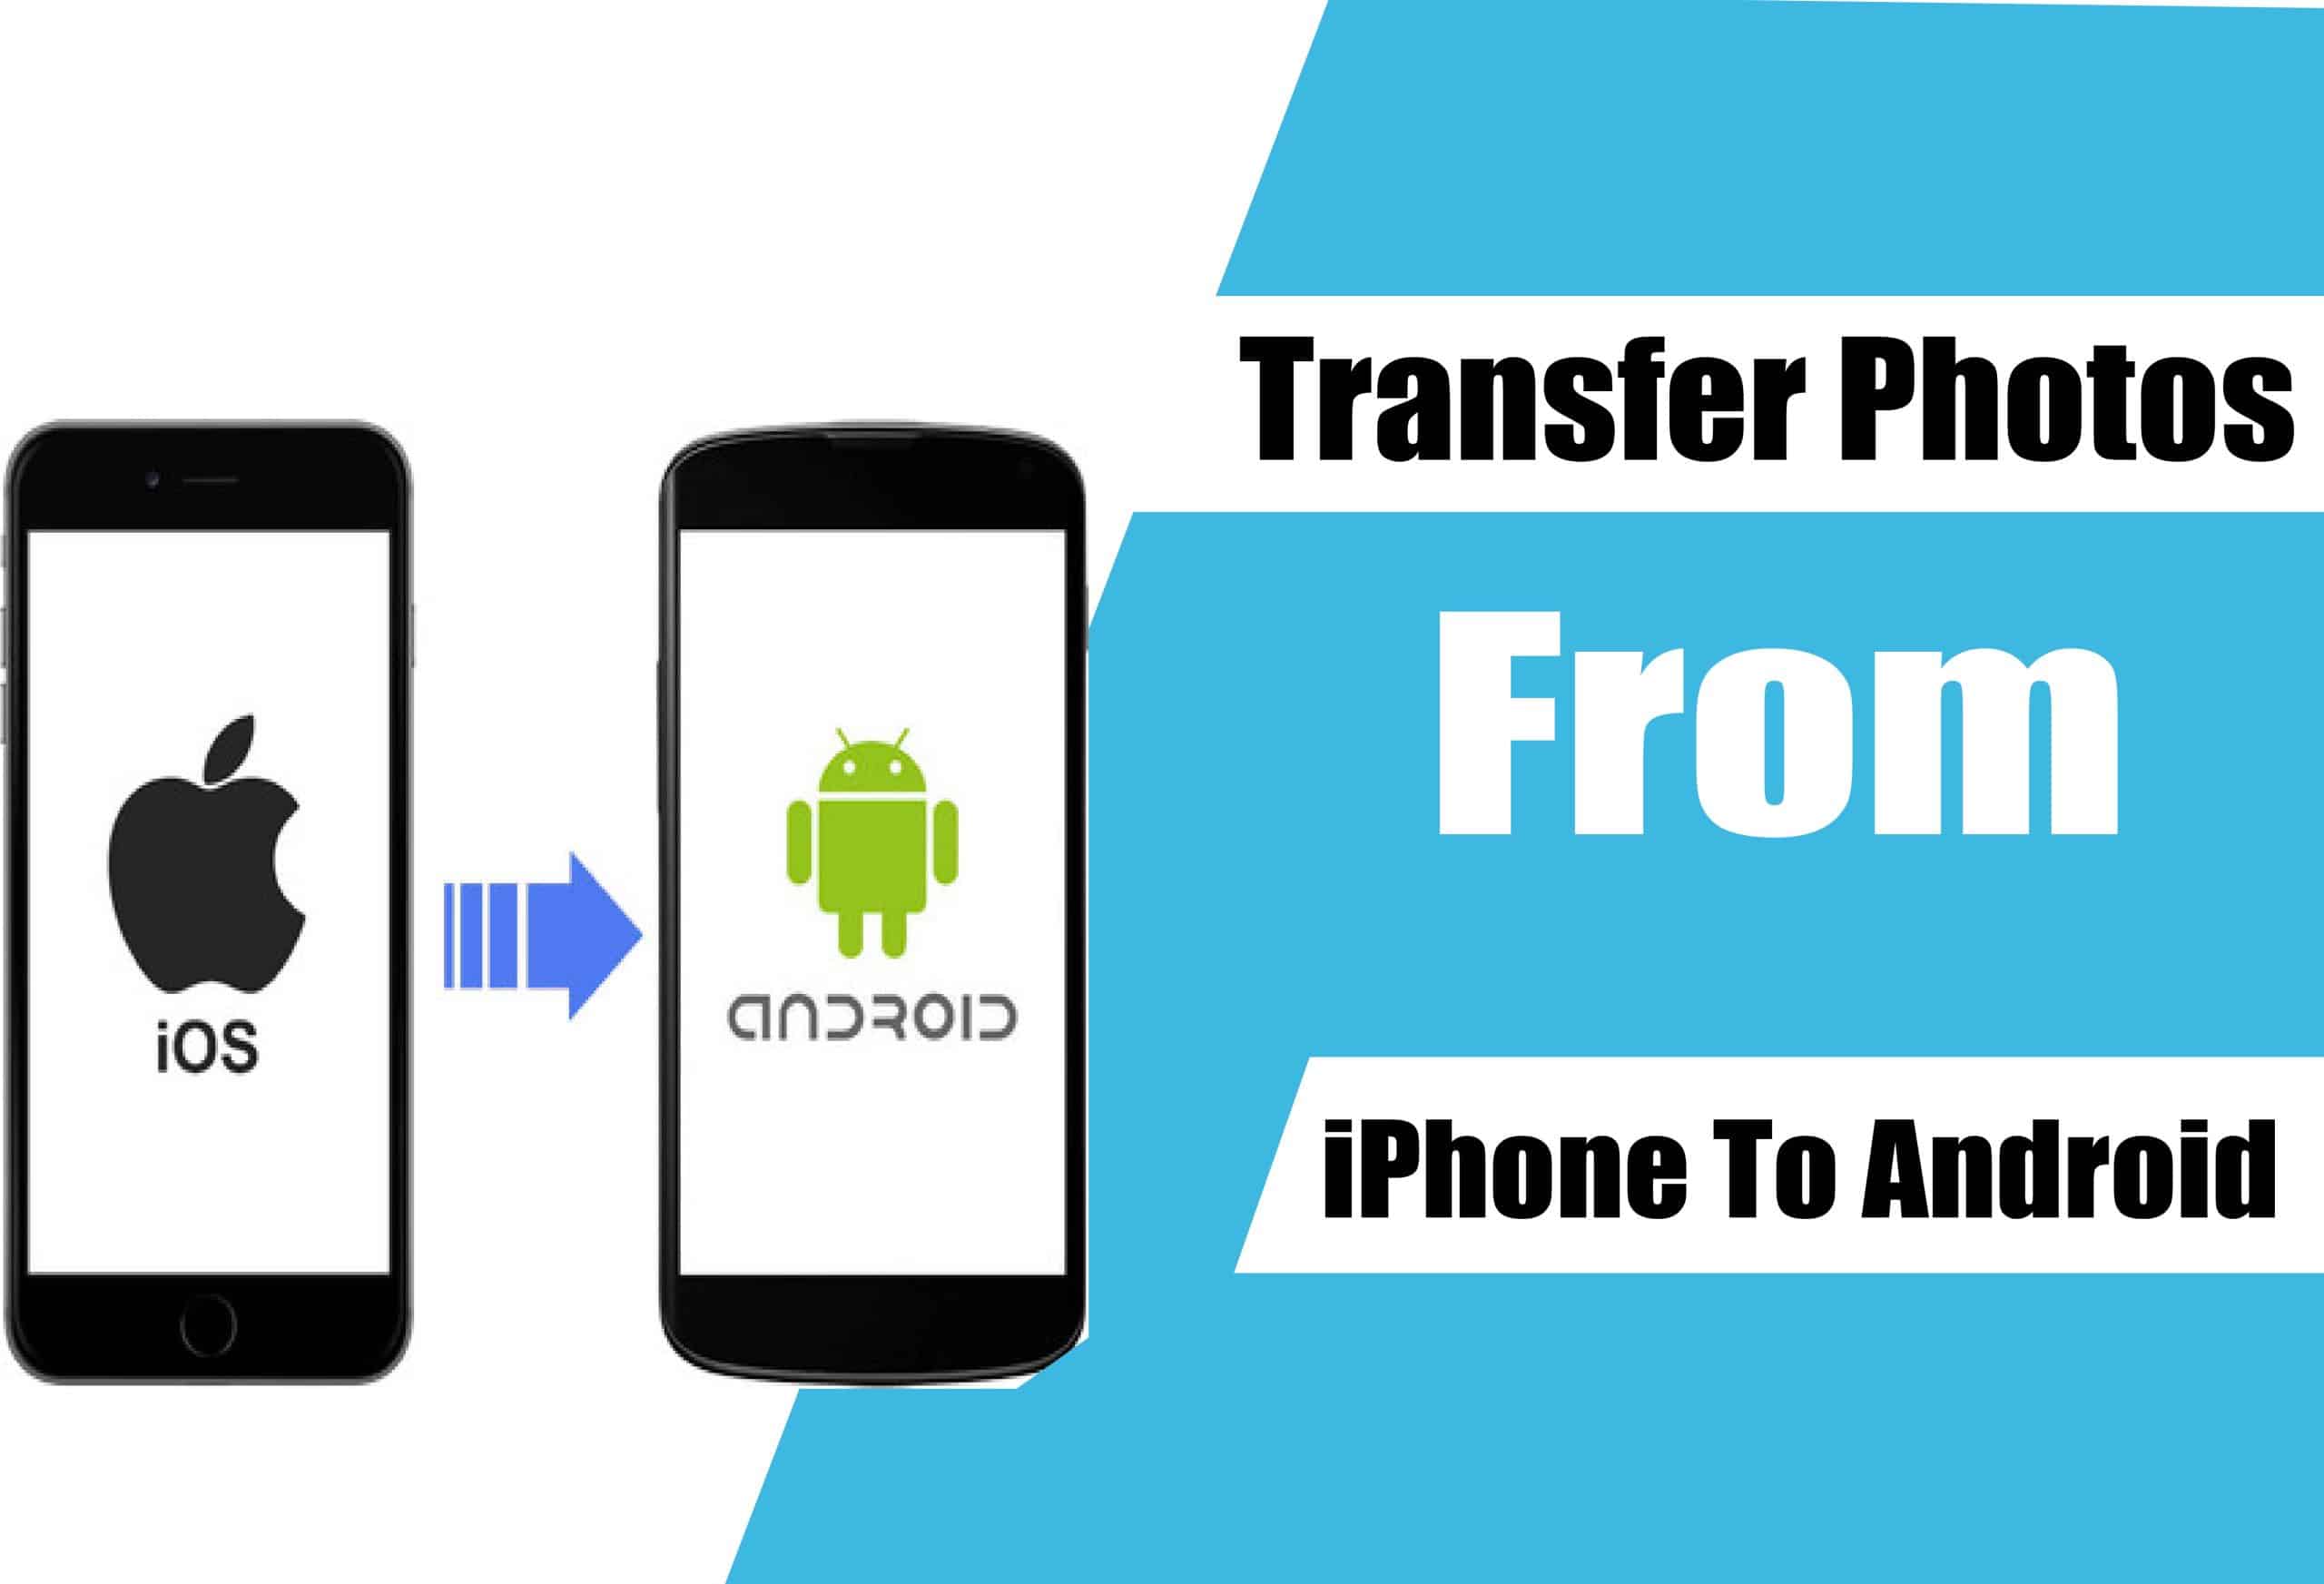 transfer photos from iPhone to android